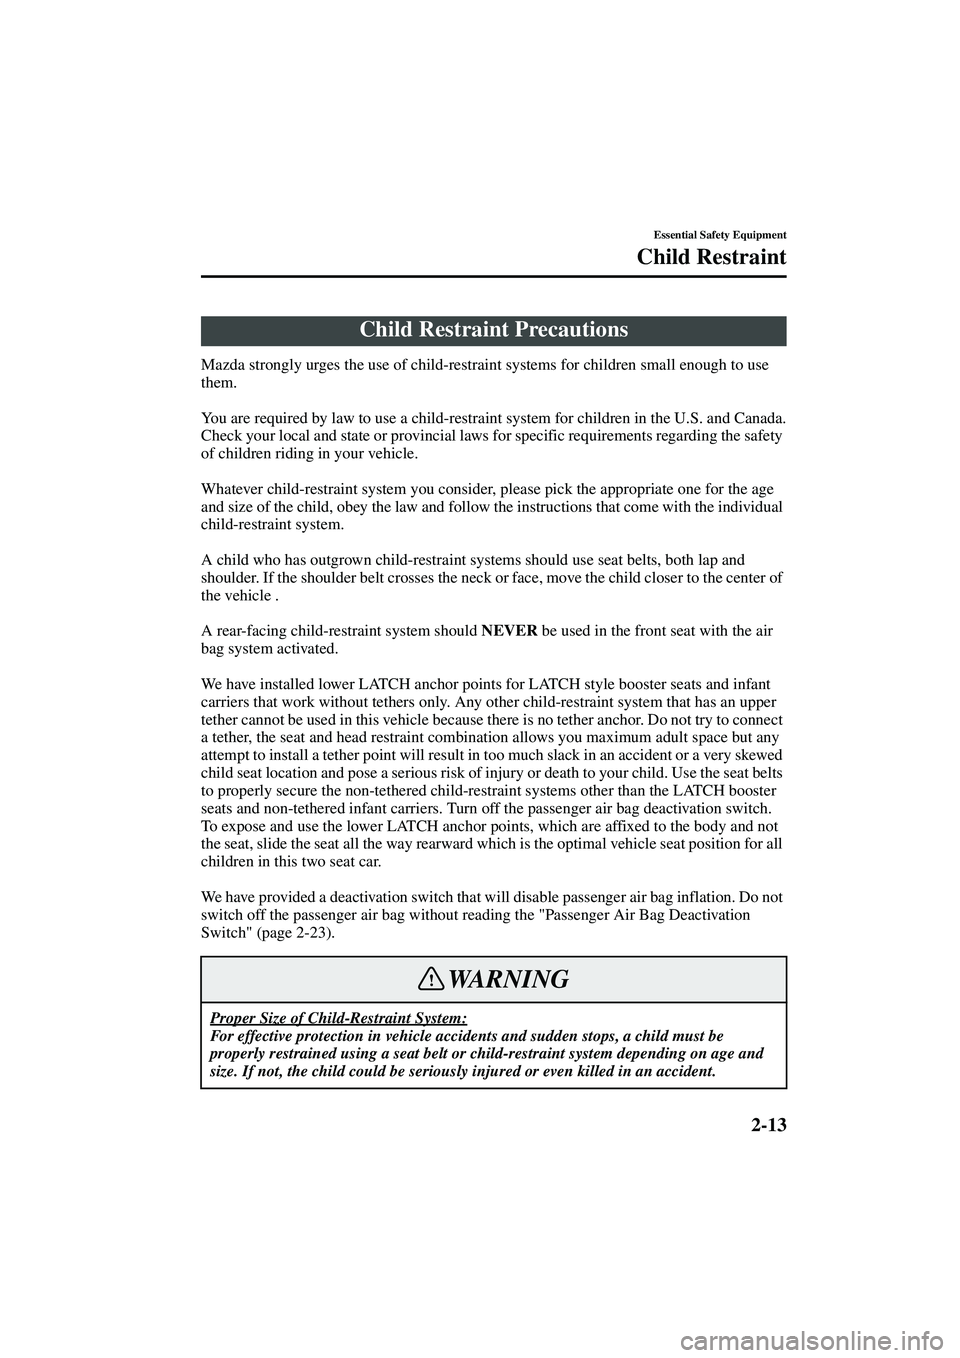 MAZDA MODEL MX-5 MIATA 2004  Owners Manual 2-13
Essential Safety Equipment
Form No. 8S15-EA-03G
Child Restraint
Mazda strongly urges the use of child-restraint systems for children small enough to use 
them.
You are required by law to use a ch